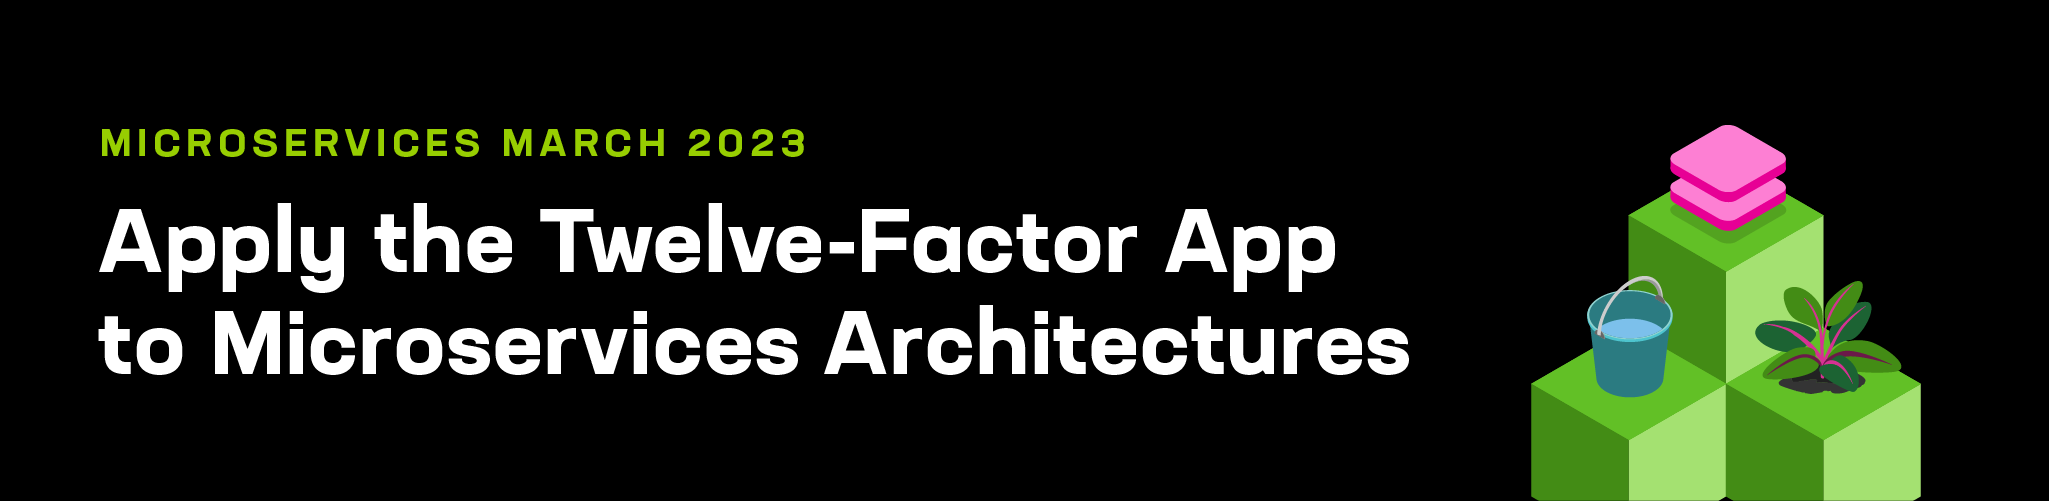 Apply the Twelve-Factor App to Microservices Architectures